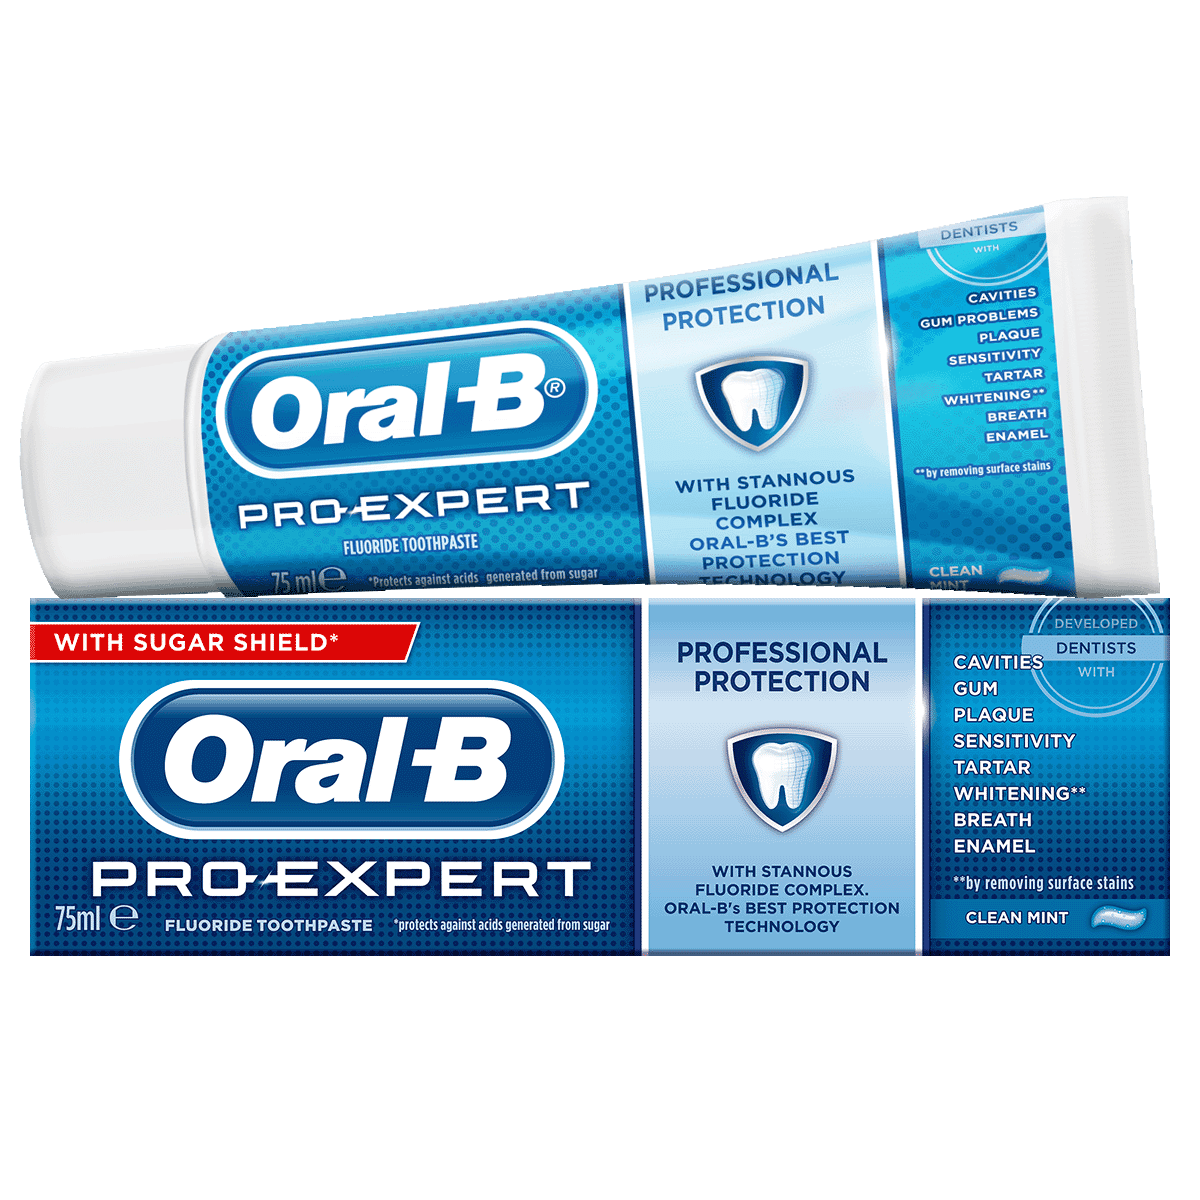 Oral-B Pro-Expert Professional Protection Toothpaste undefined